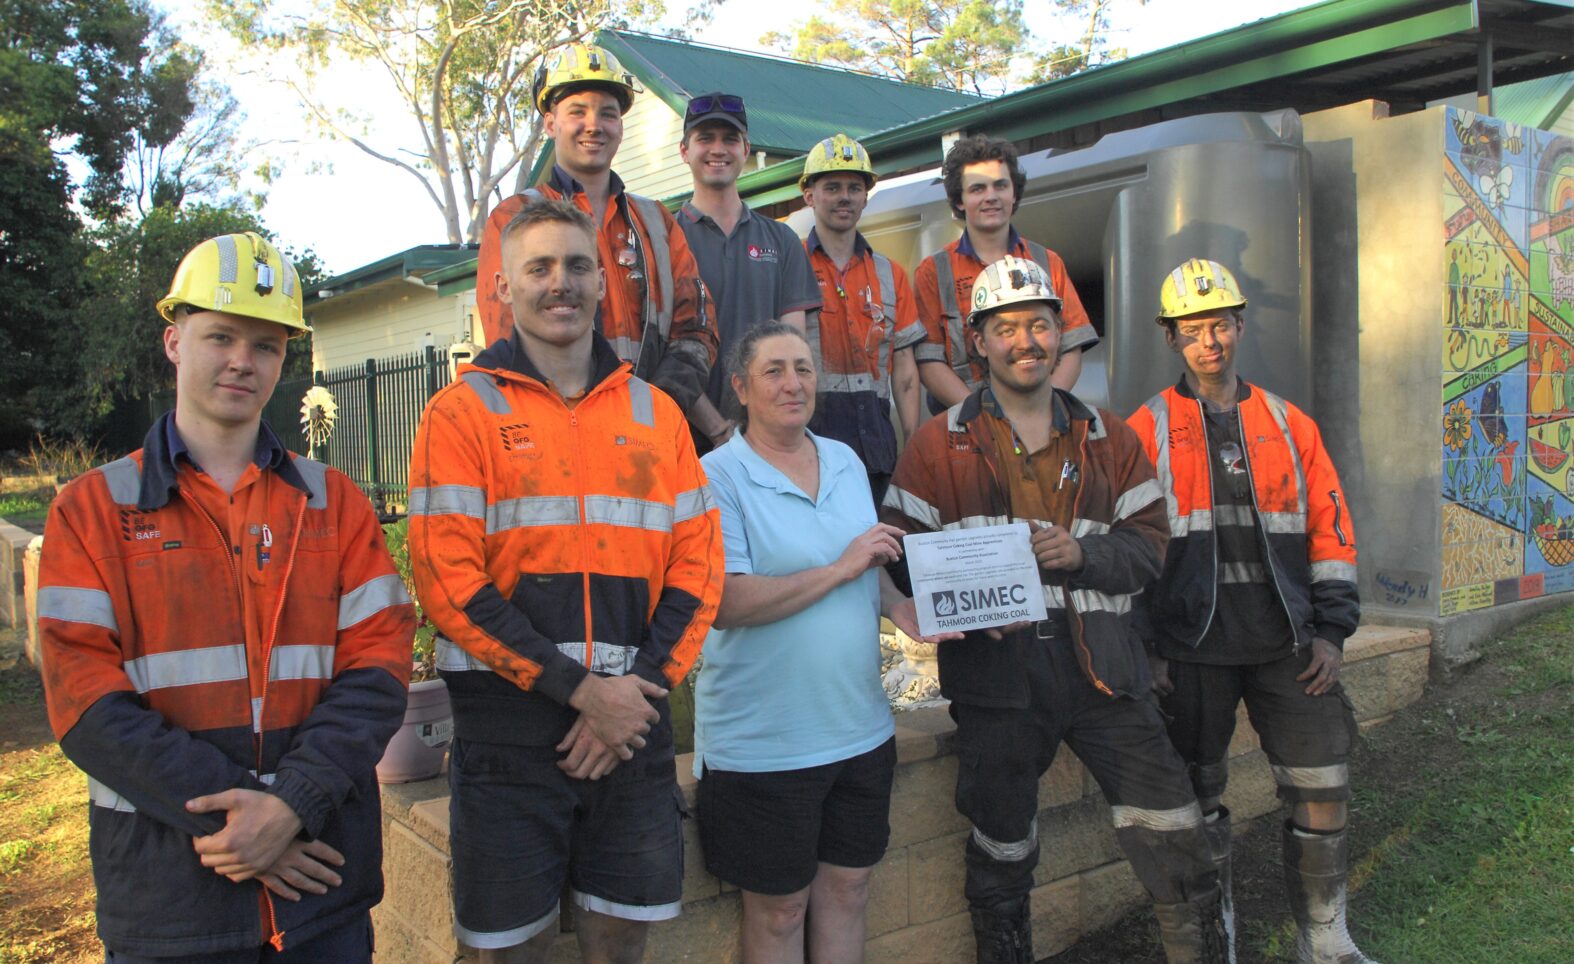 Tahmoor apprentices pitch in to complete community project in Australia